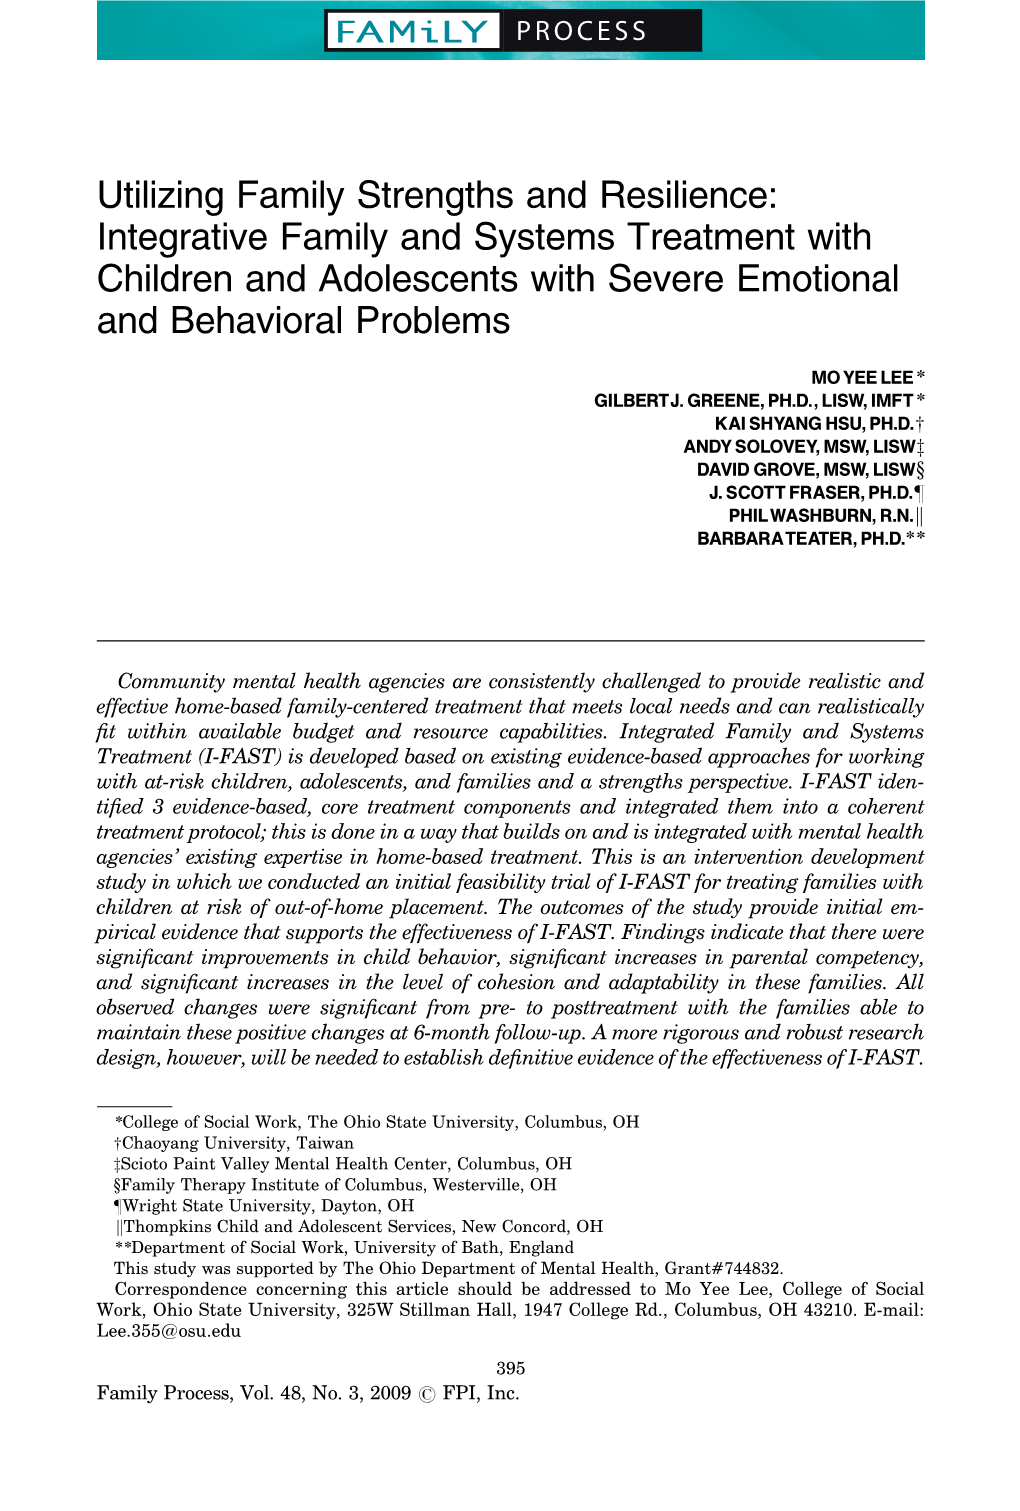 Utilizing Family Strengths and Resilience: Integrative Family and Systems Treatment with Children and Adolescents with Severe Emotional and Behavioral Problems